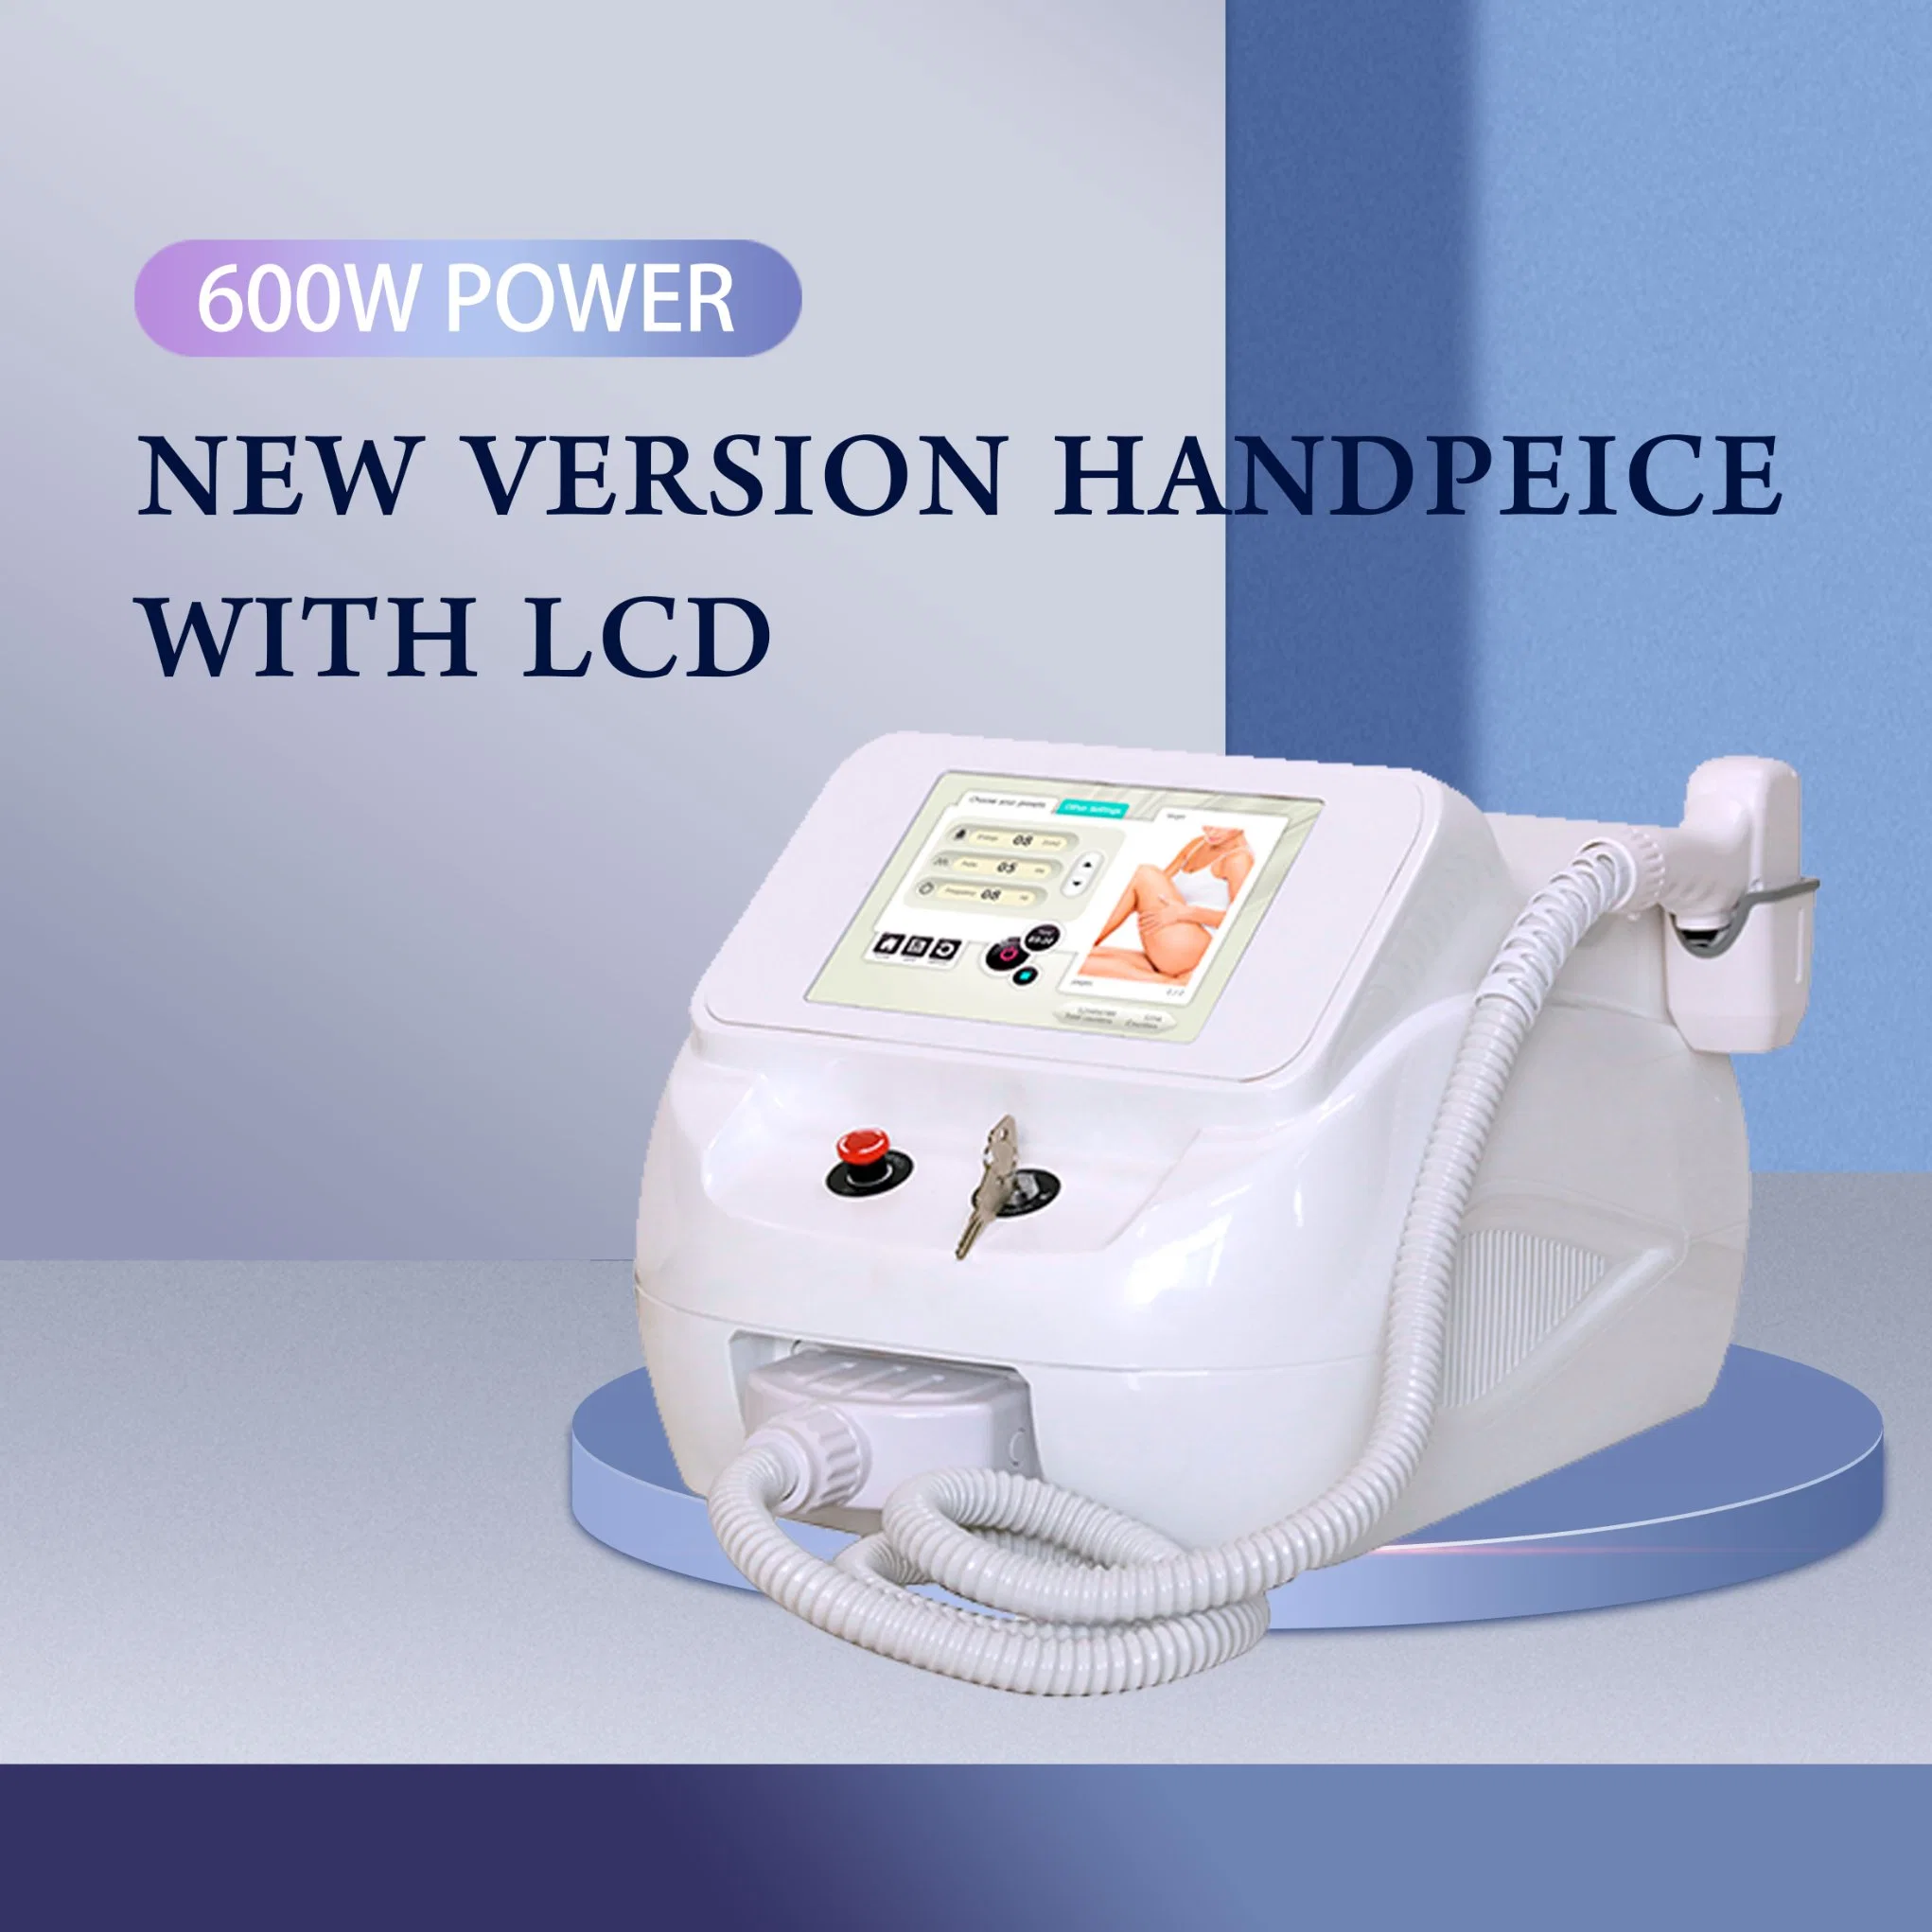 China Professional High Power Laser Hair Removal Skin Rejuvenation Beauty Instrument Salon Equipment 3 Waves 1600W 1200W Diode